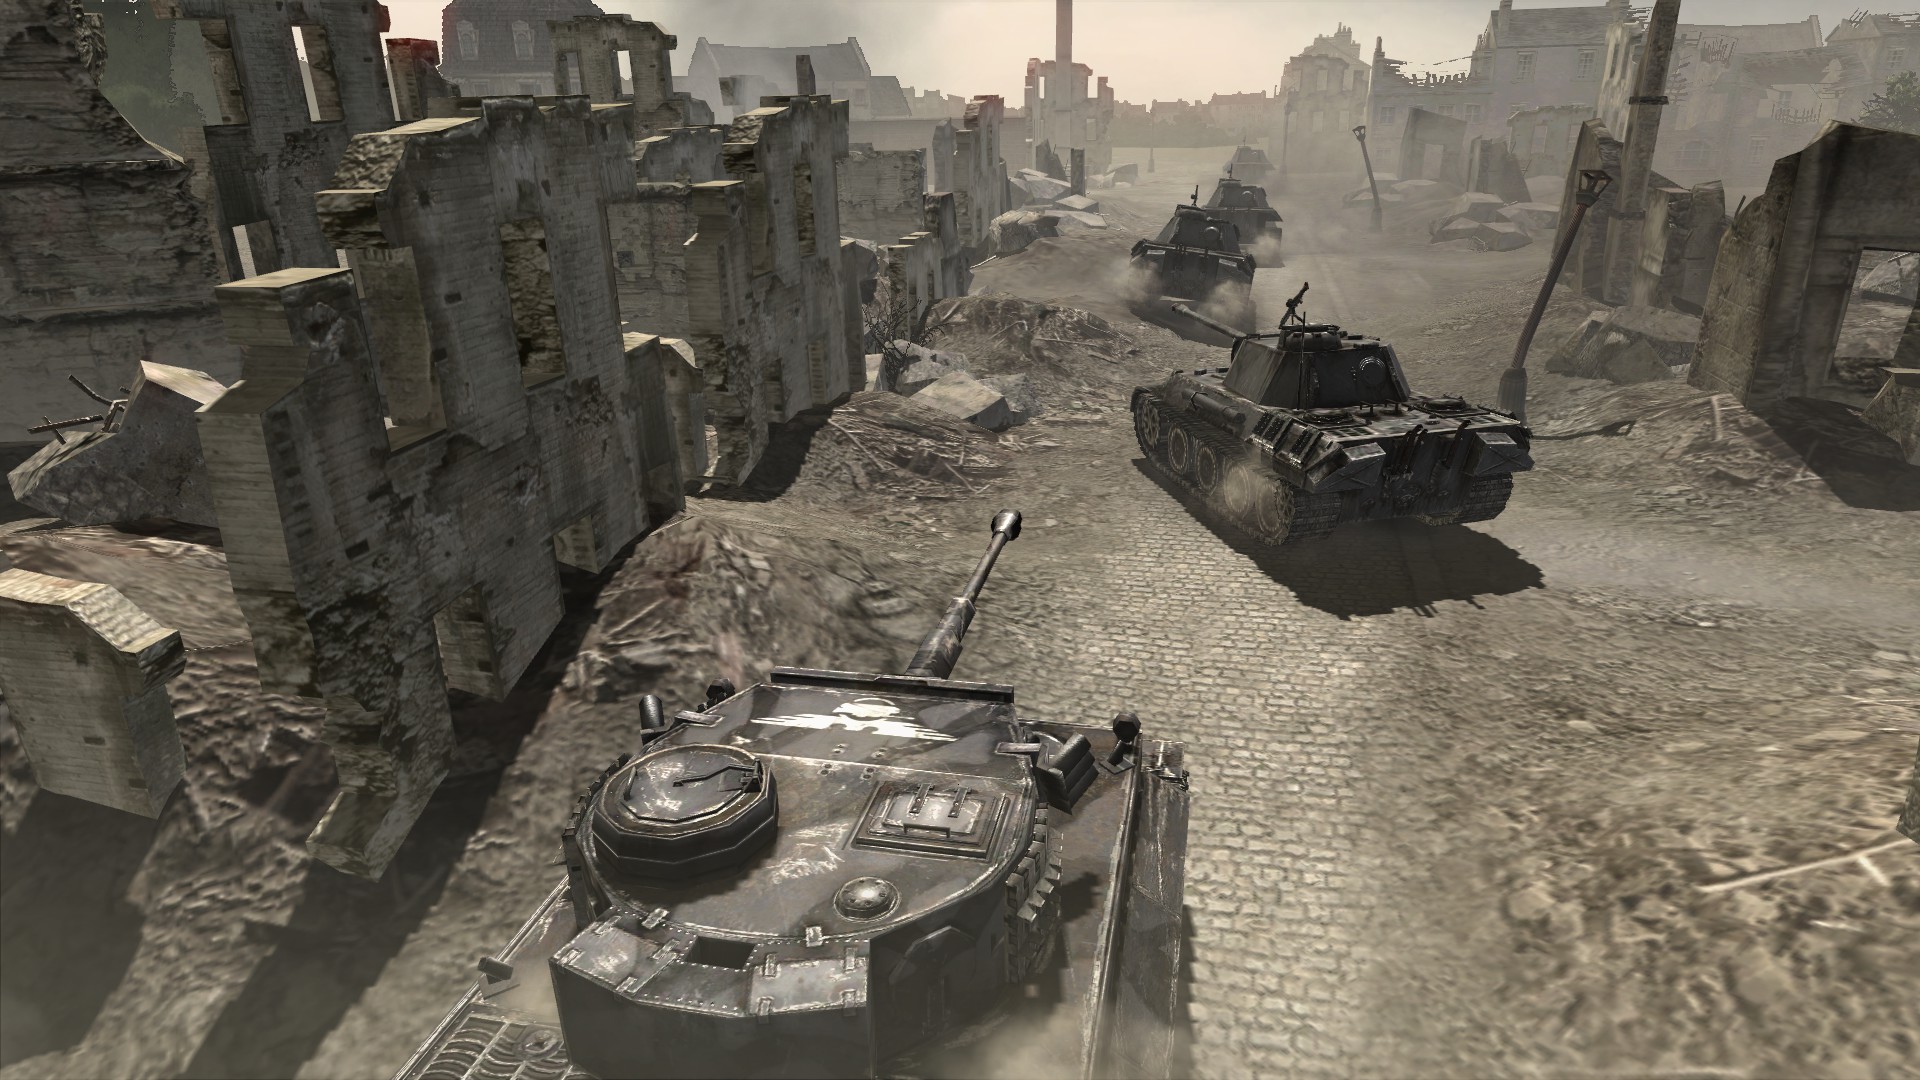 company of heroes steam version mods ai use infantry